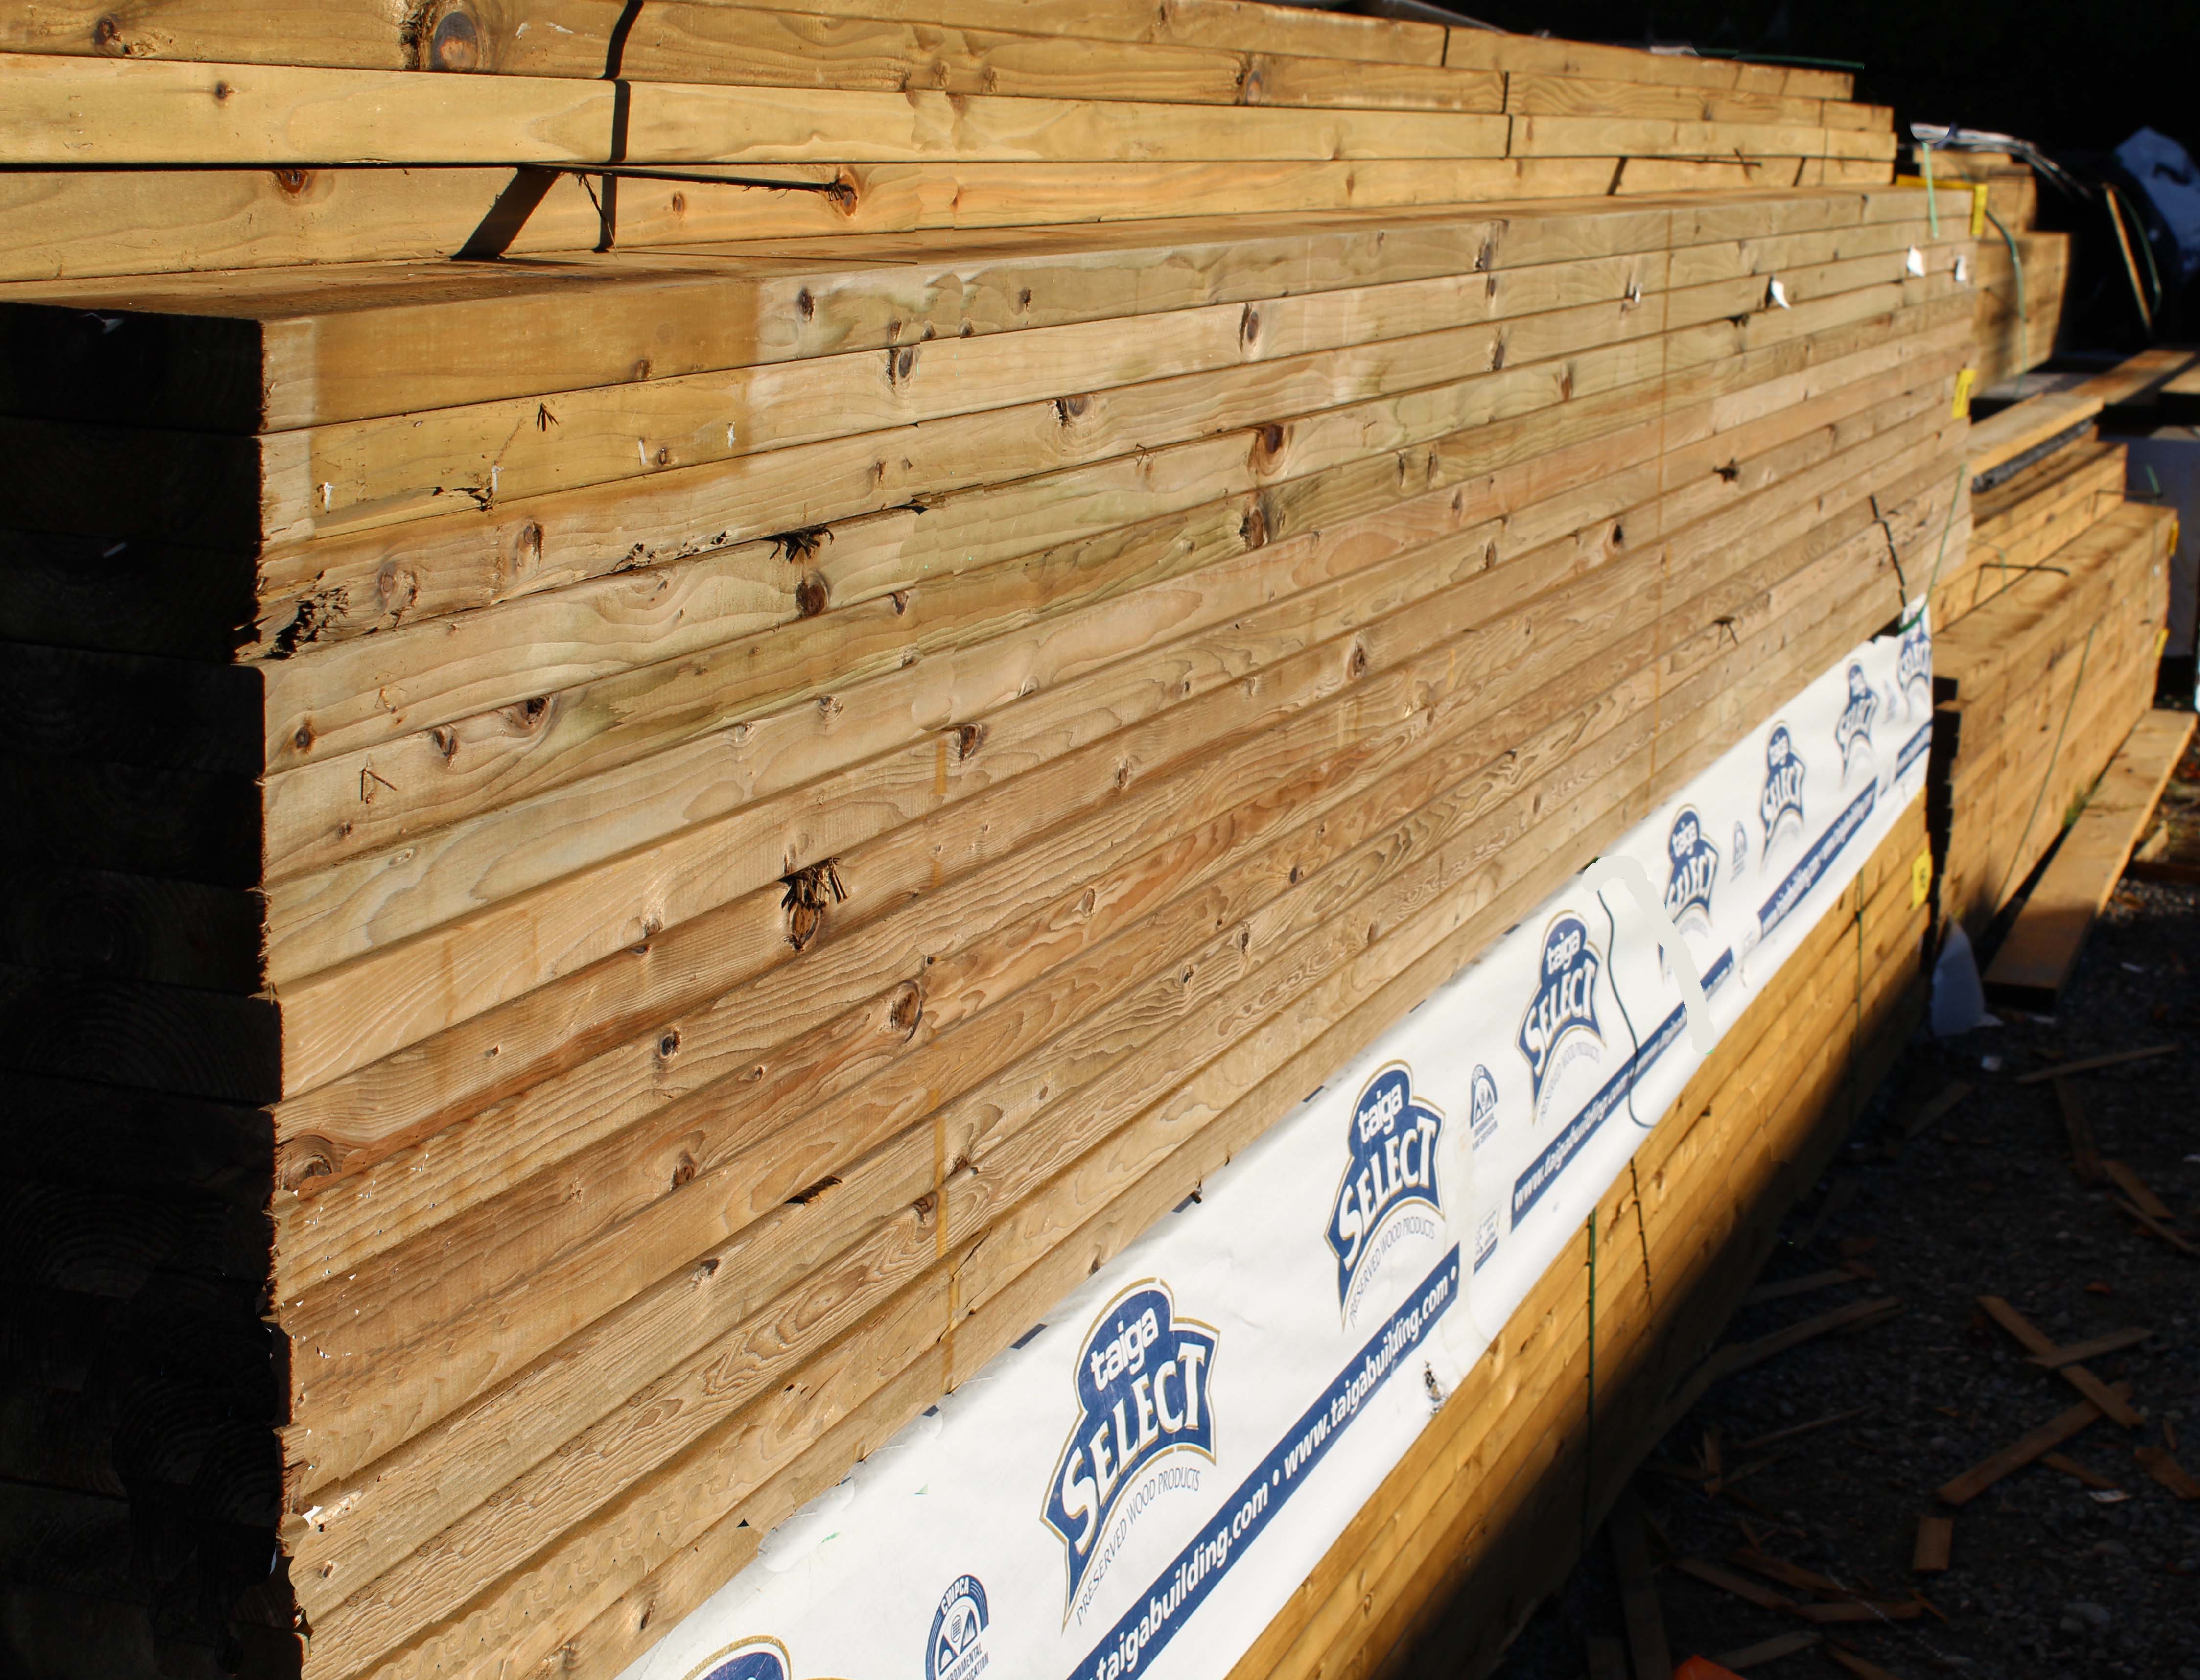 Variety of Wood and Lumber